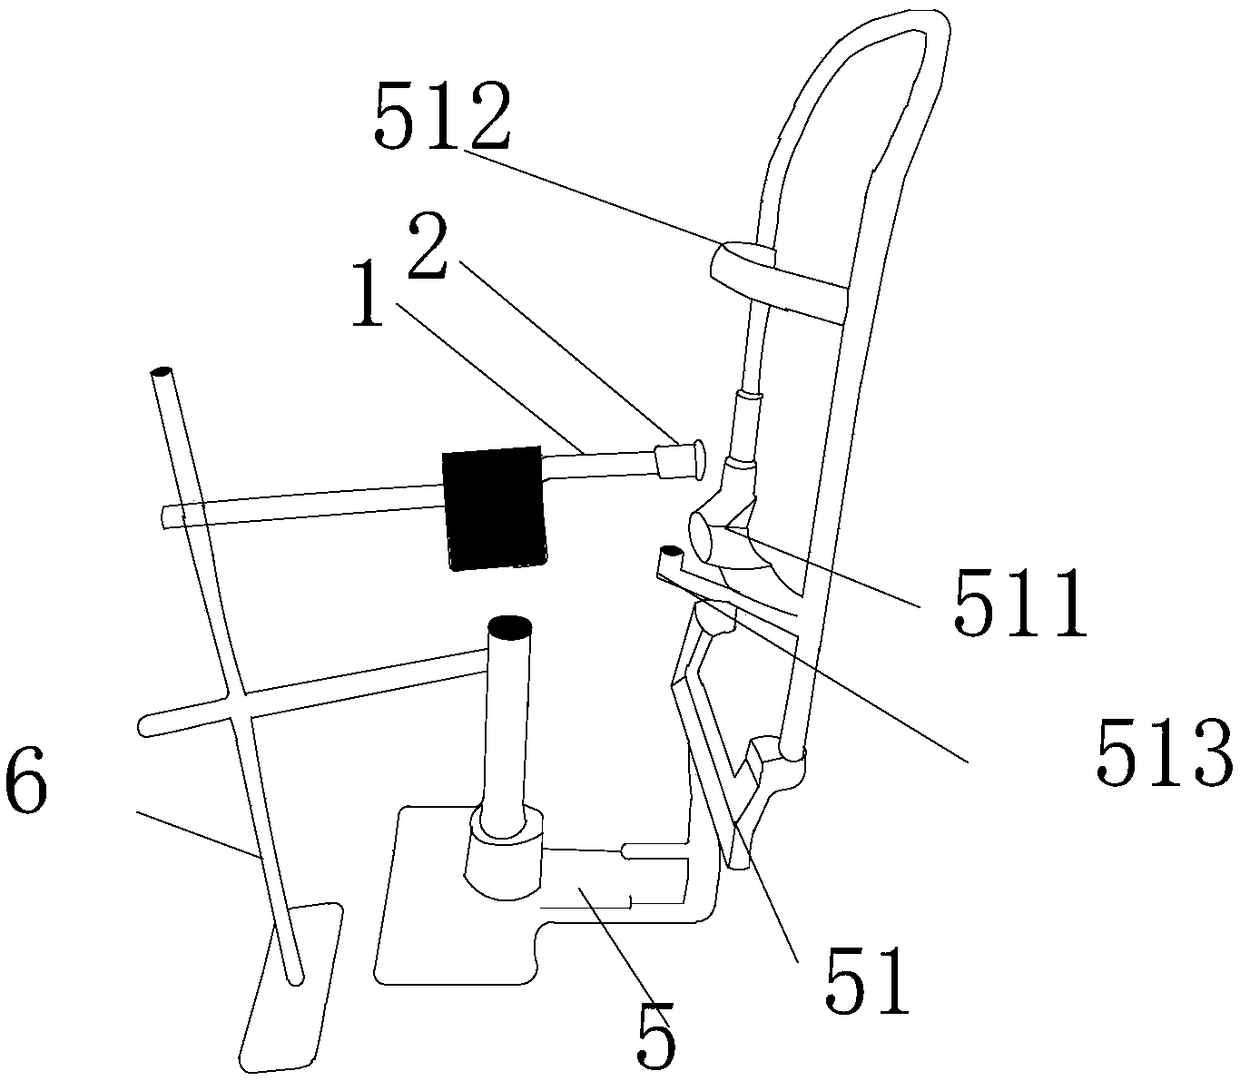 Tongue muscle and soft palate muscle group training integrated device